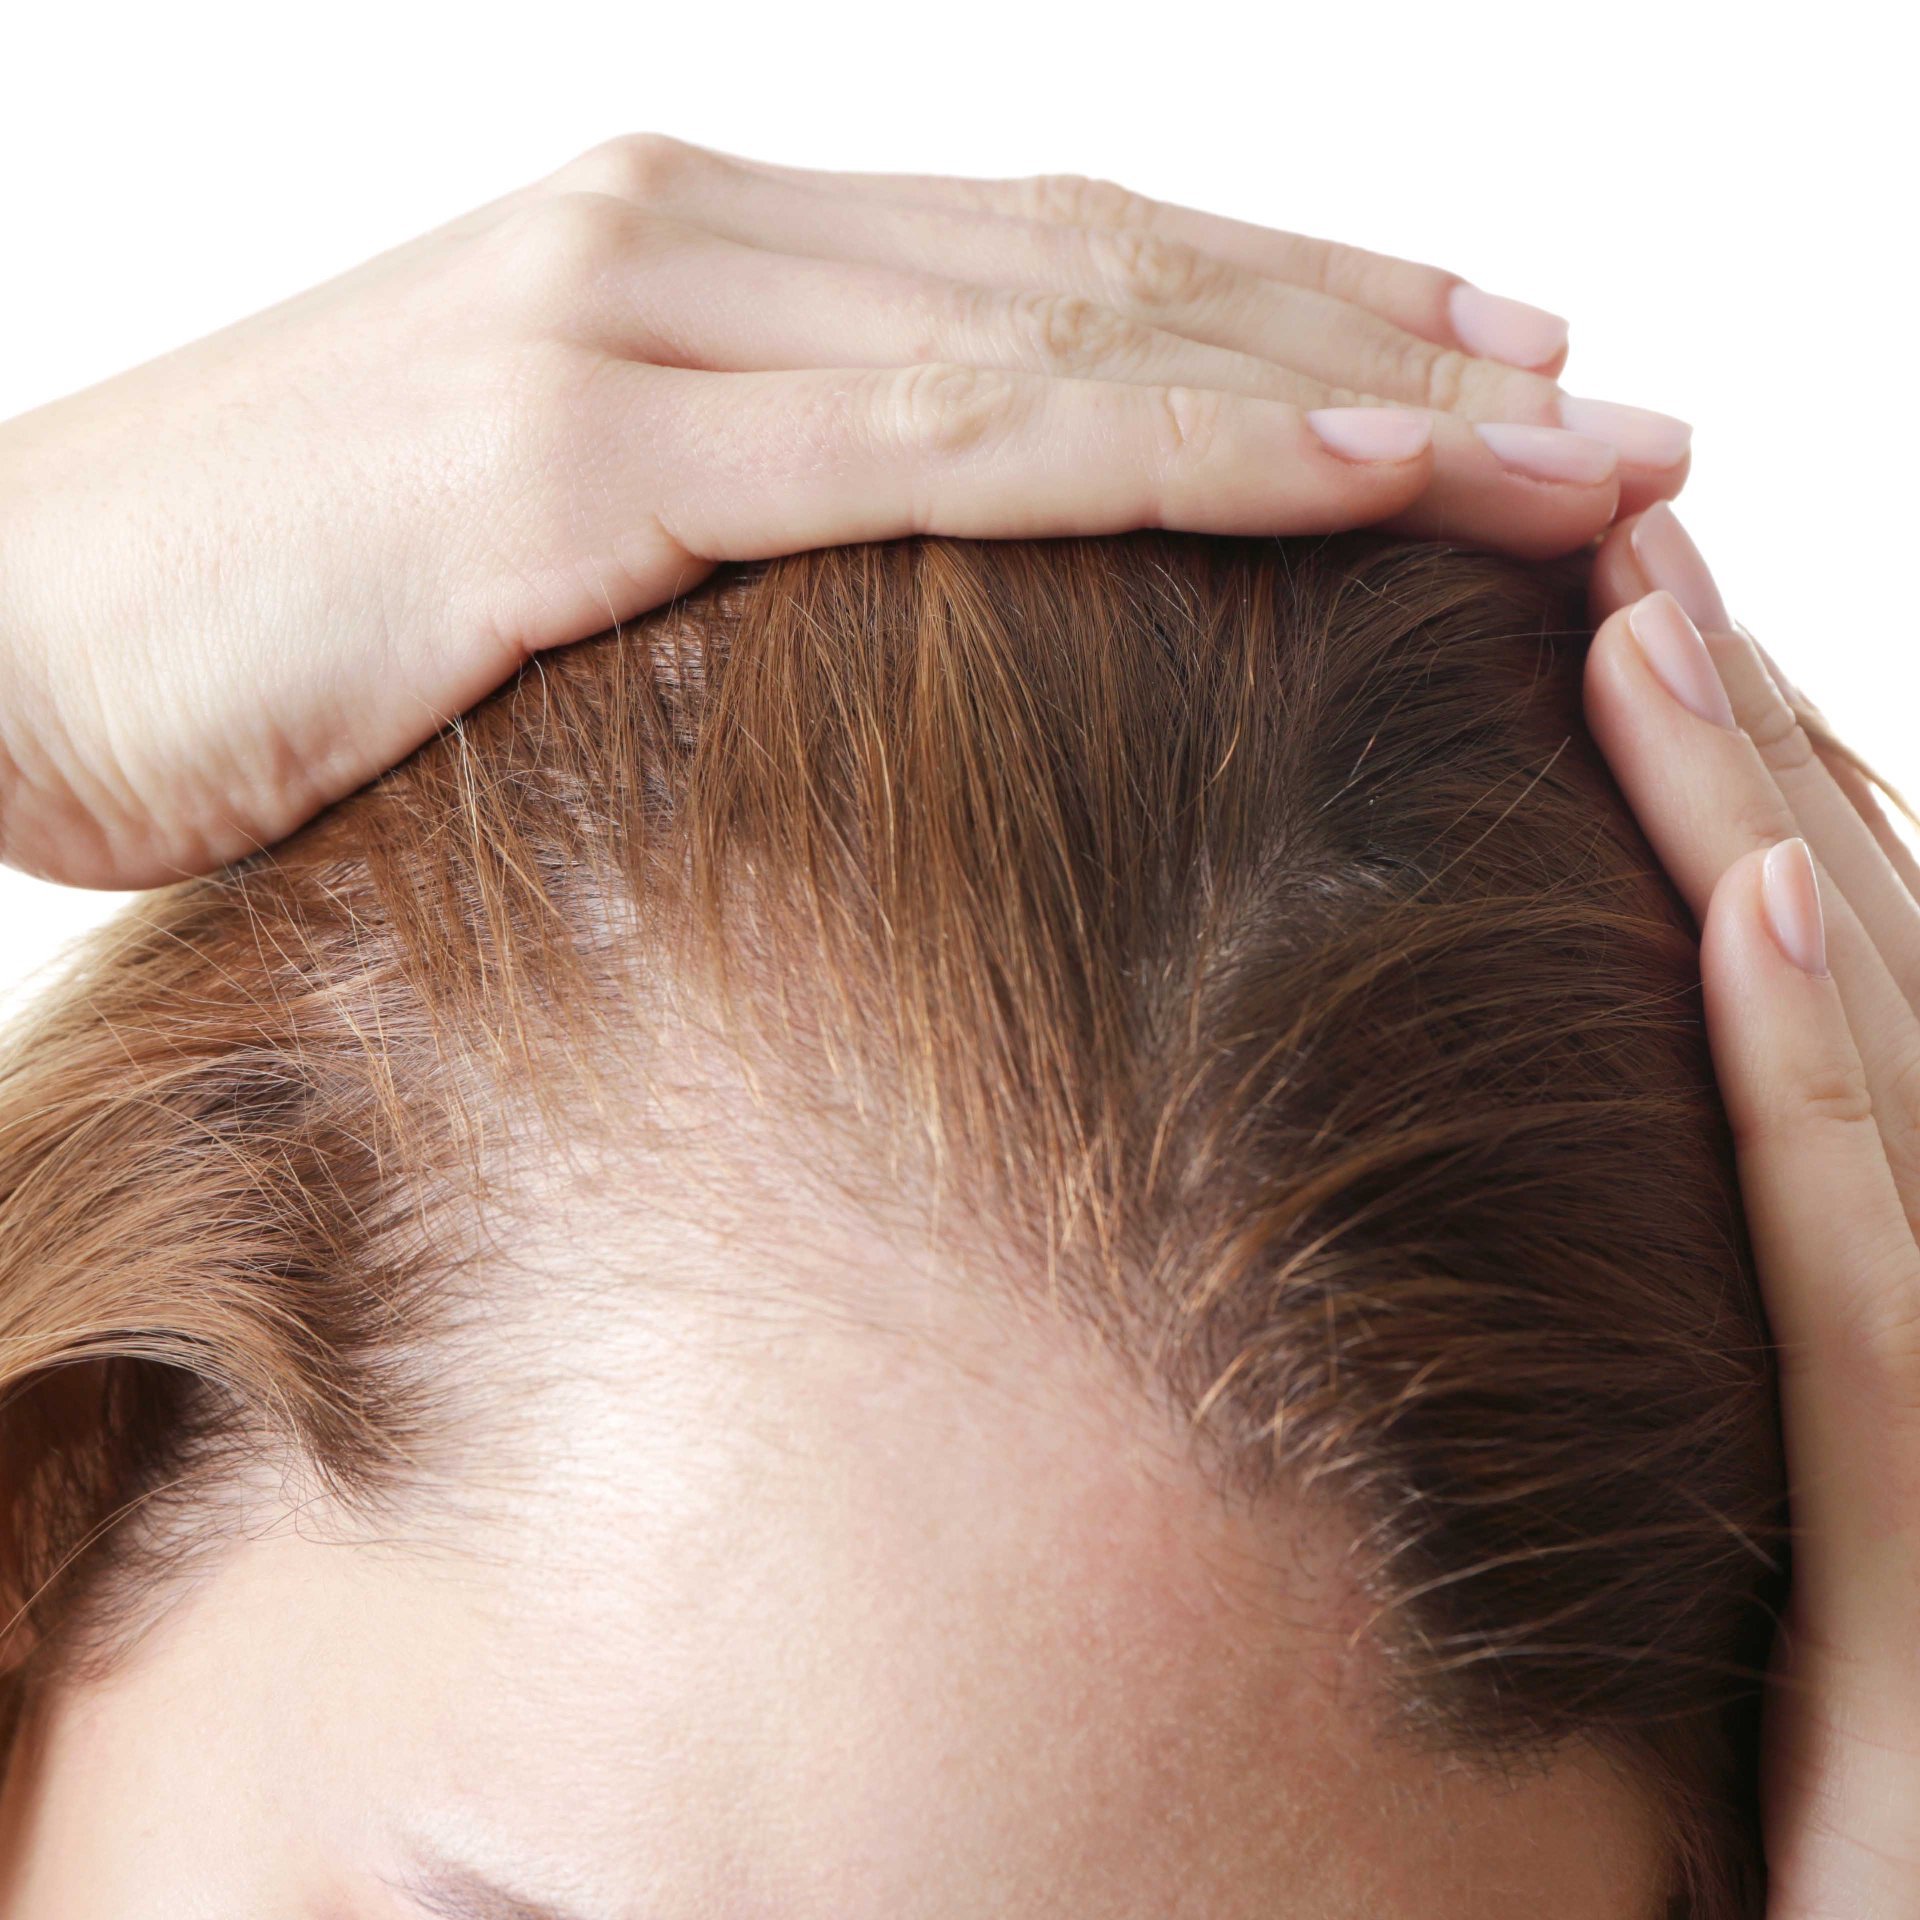 Thinning hair: Causes, treatments and prevention